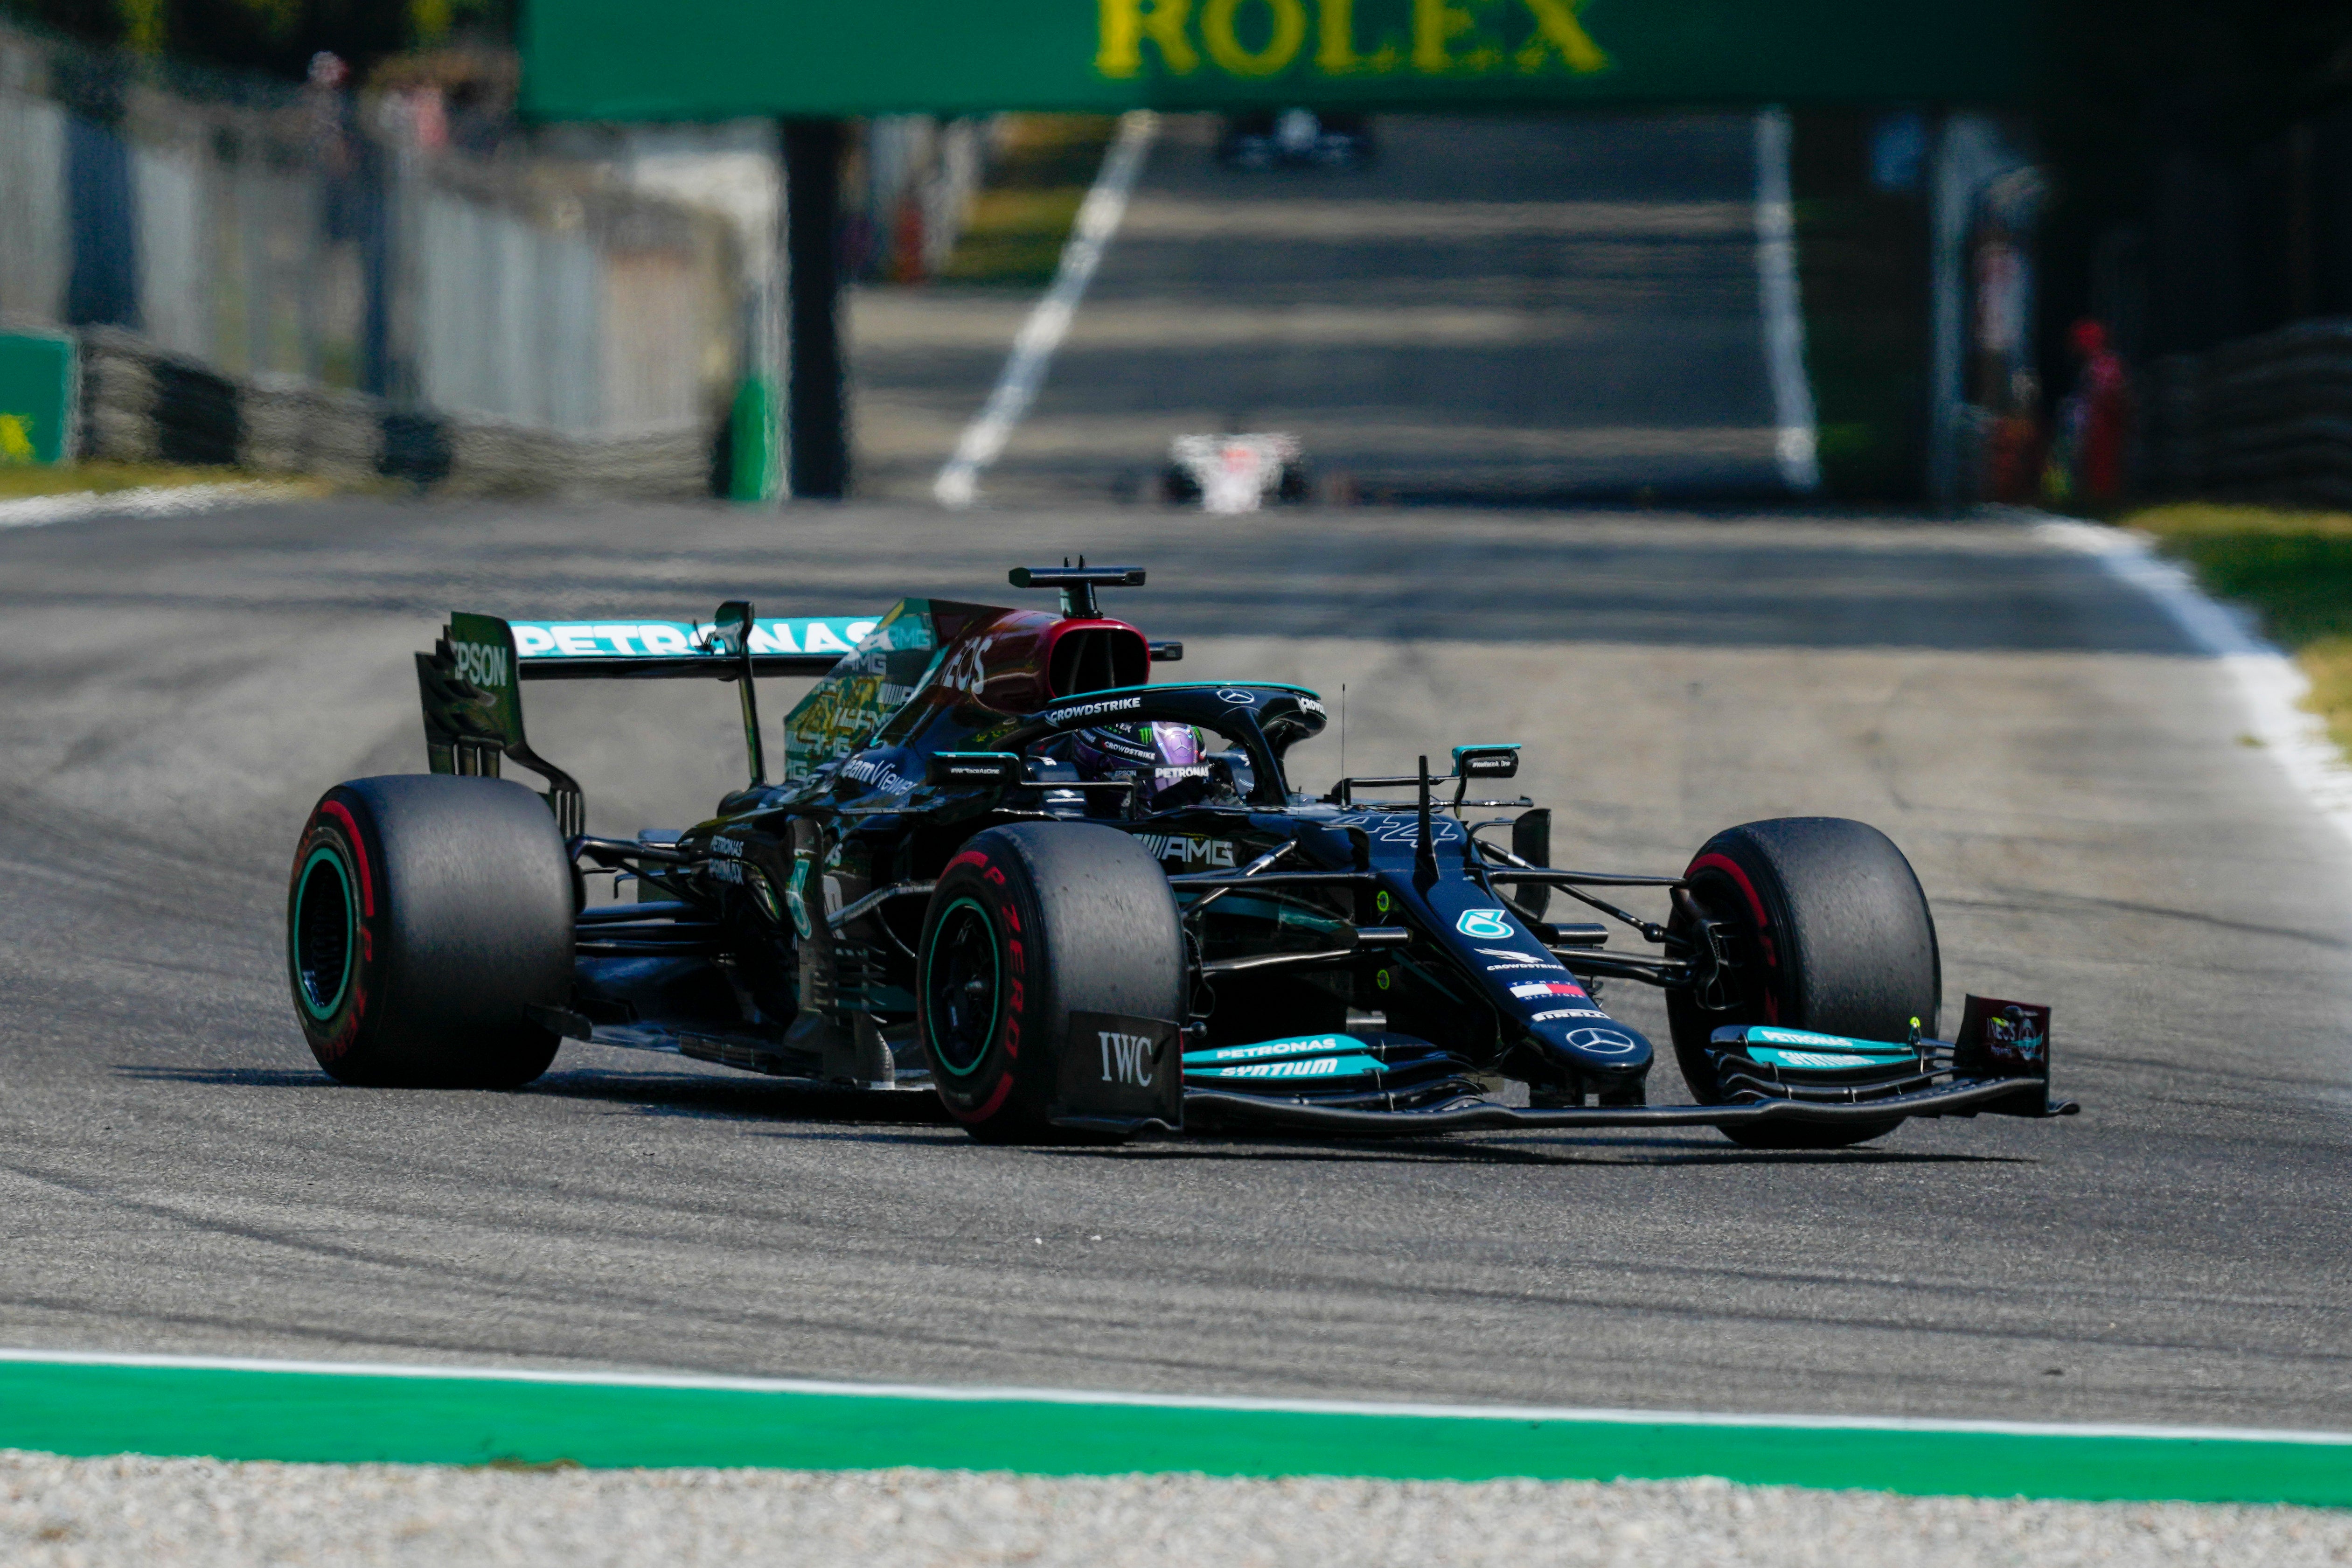 Lewis Hamilton could only manage fifth place in the sprint race at the Italian Grand Prix (Antonio Calanni/AP).